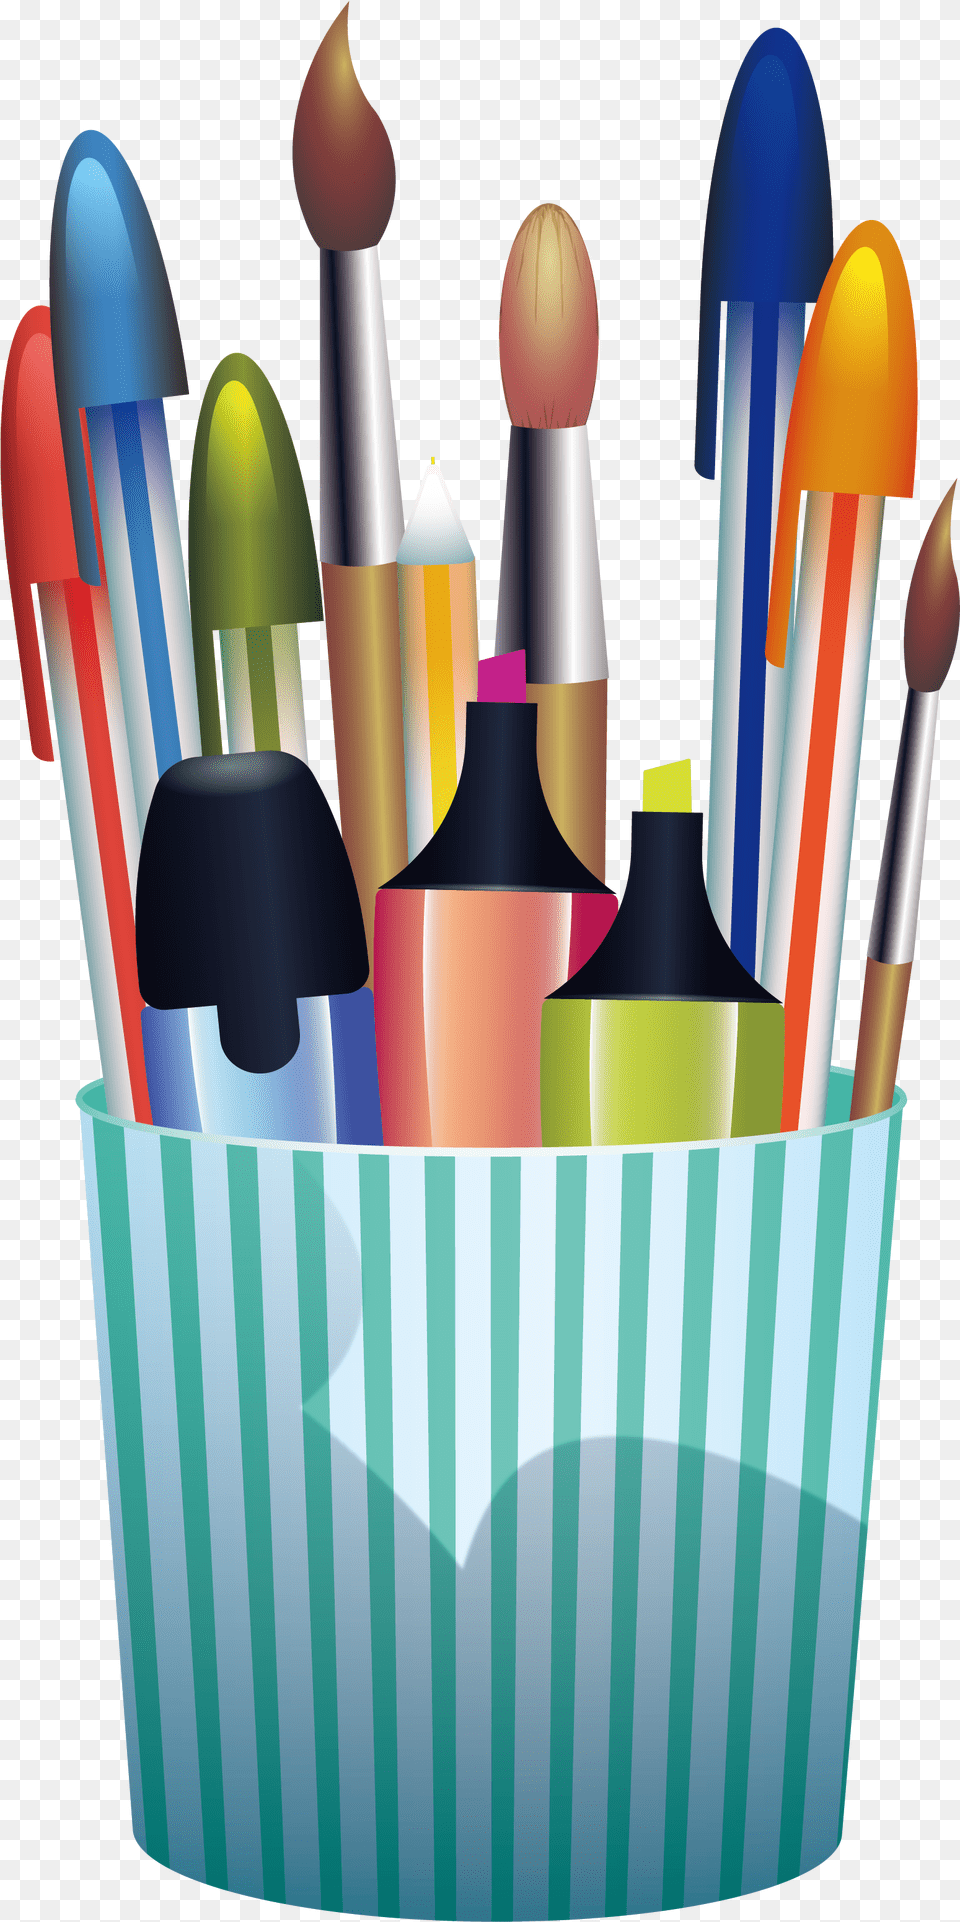 Pencil Clip Art Green Stripe Pen Container Pencil, Brush, Device, Tool Free Transparent Png